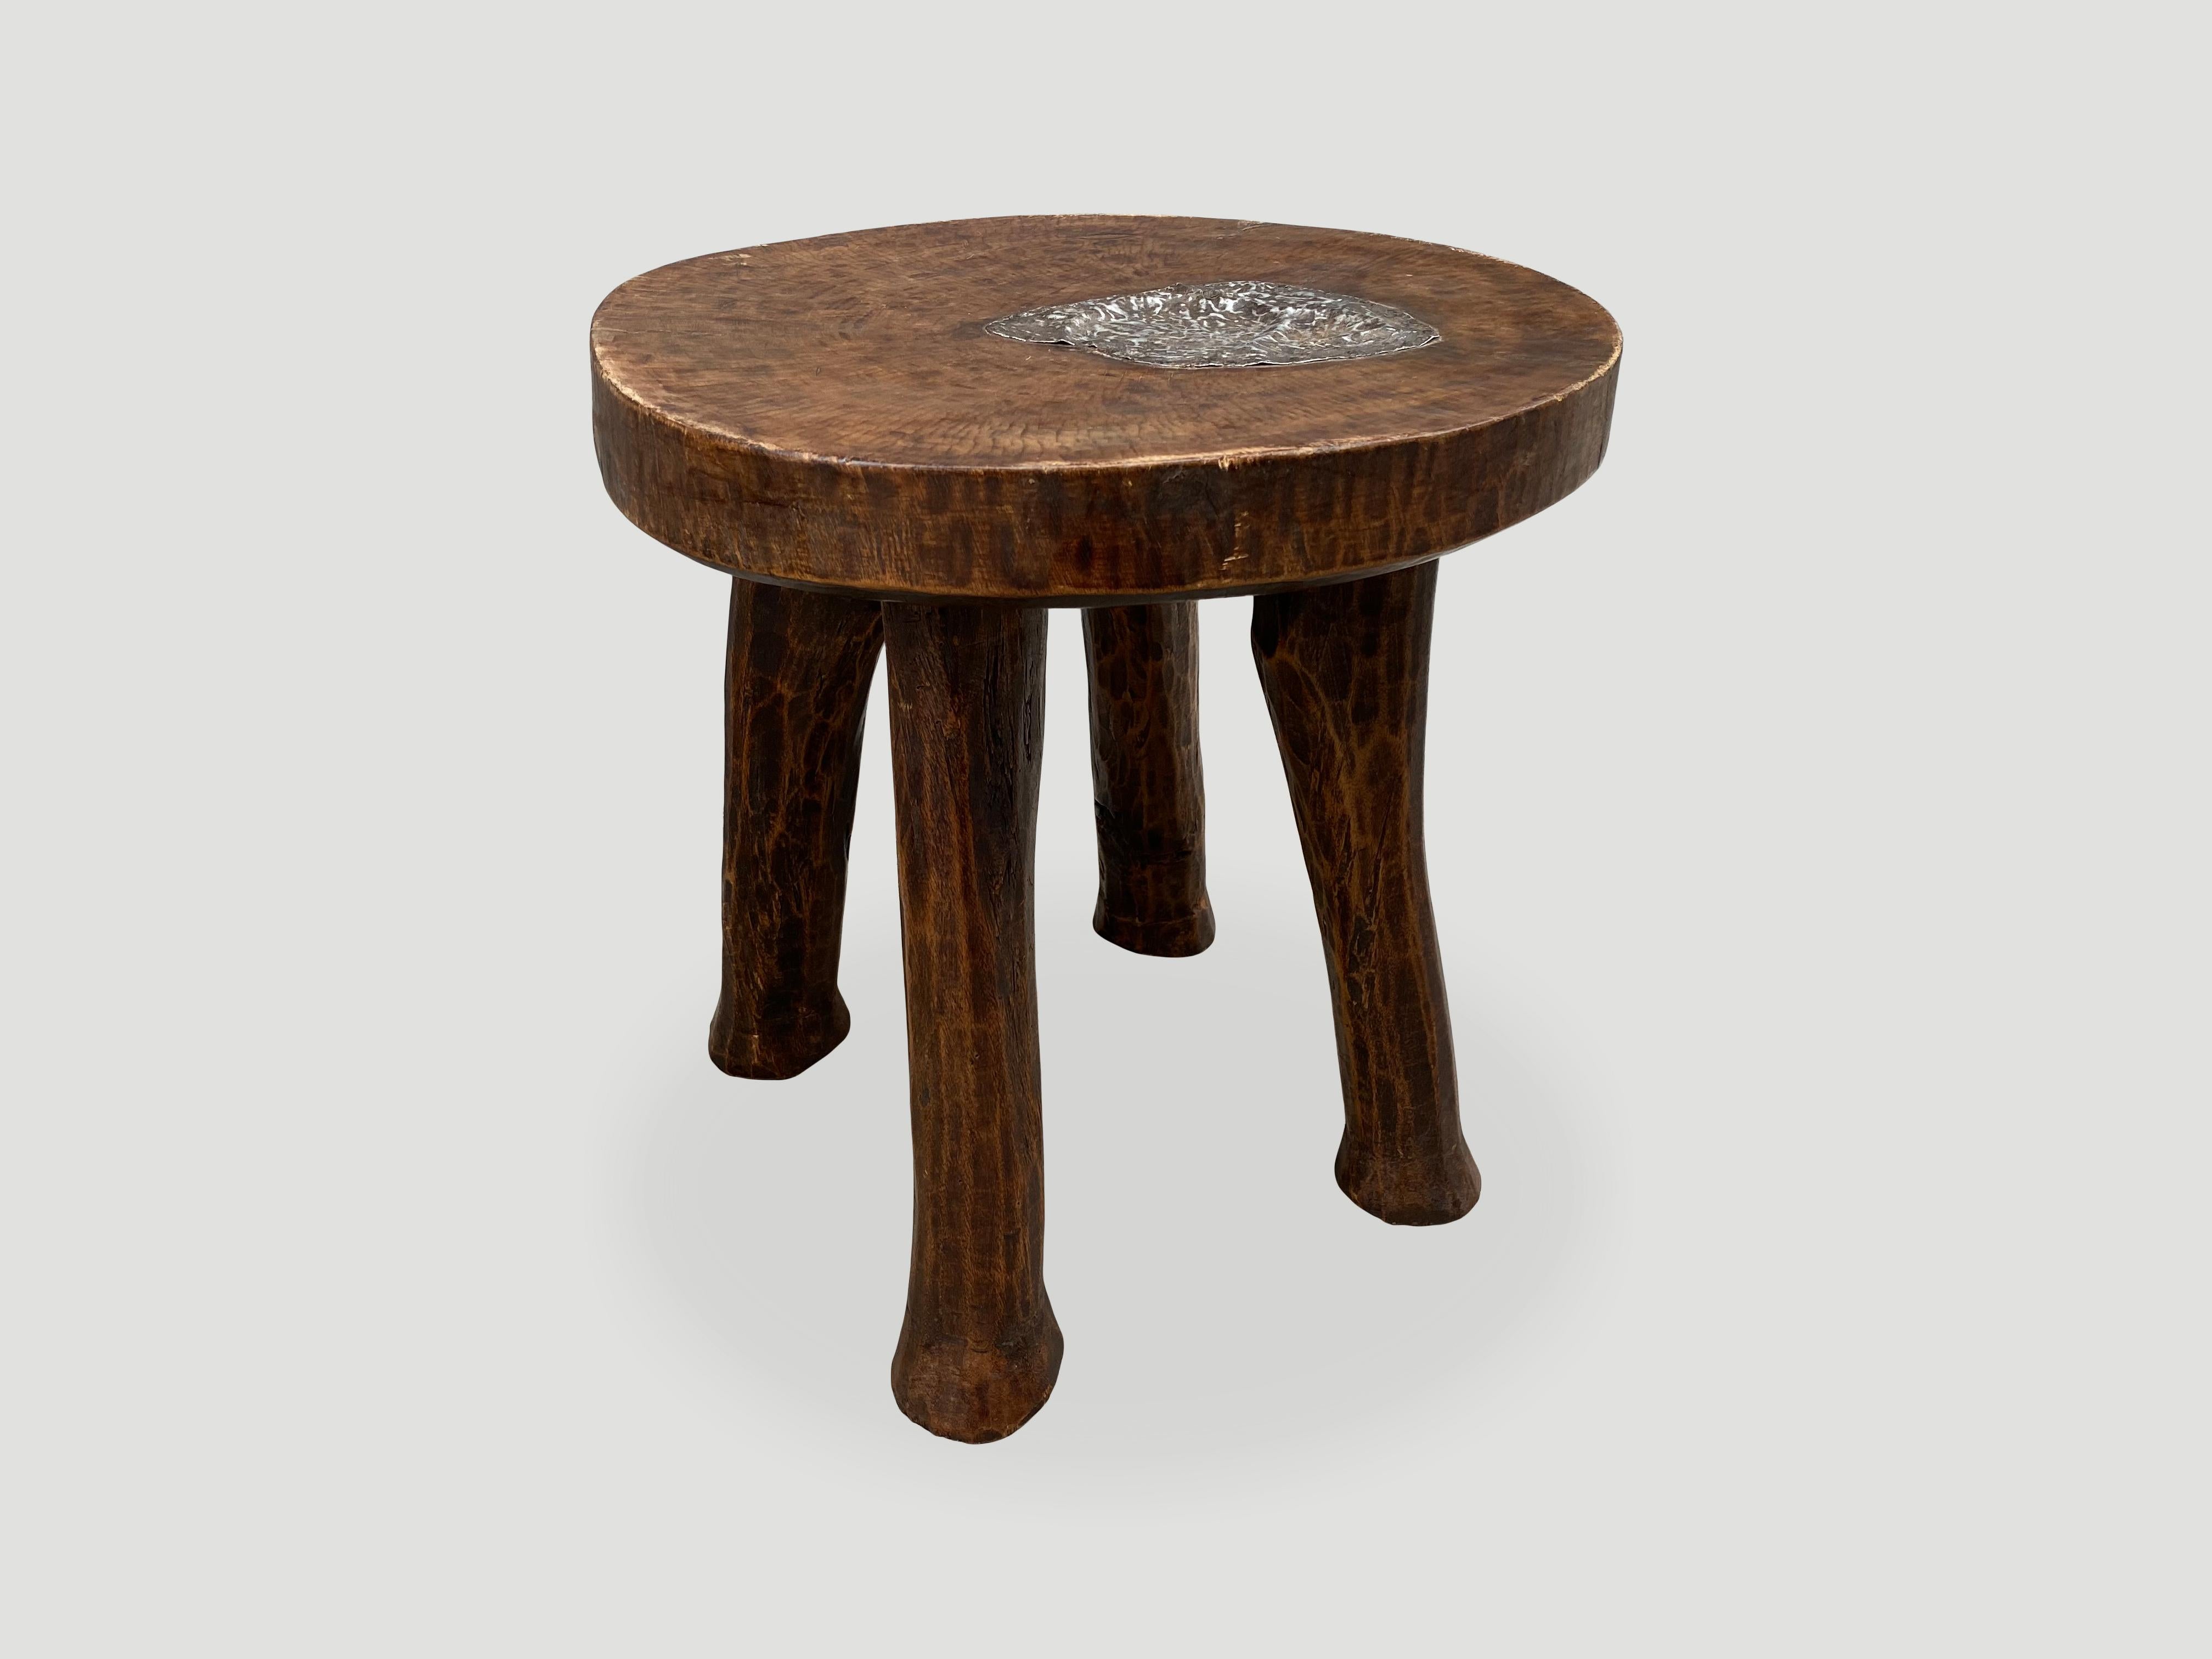 Antique African mahogany side table, hand carved from a single block of mahogany wood with lovely patina and tin overlay. A beautiful, versatile item that is both sculptural and usable. We only source the best.

This side table was sourced in the